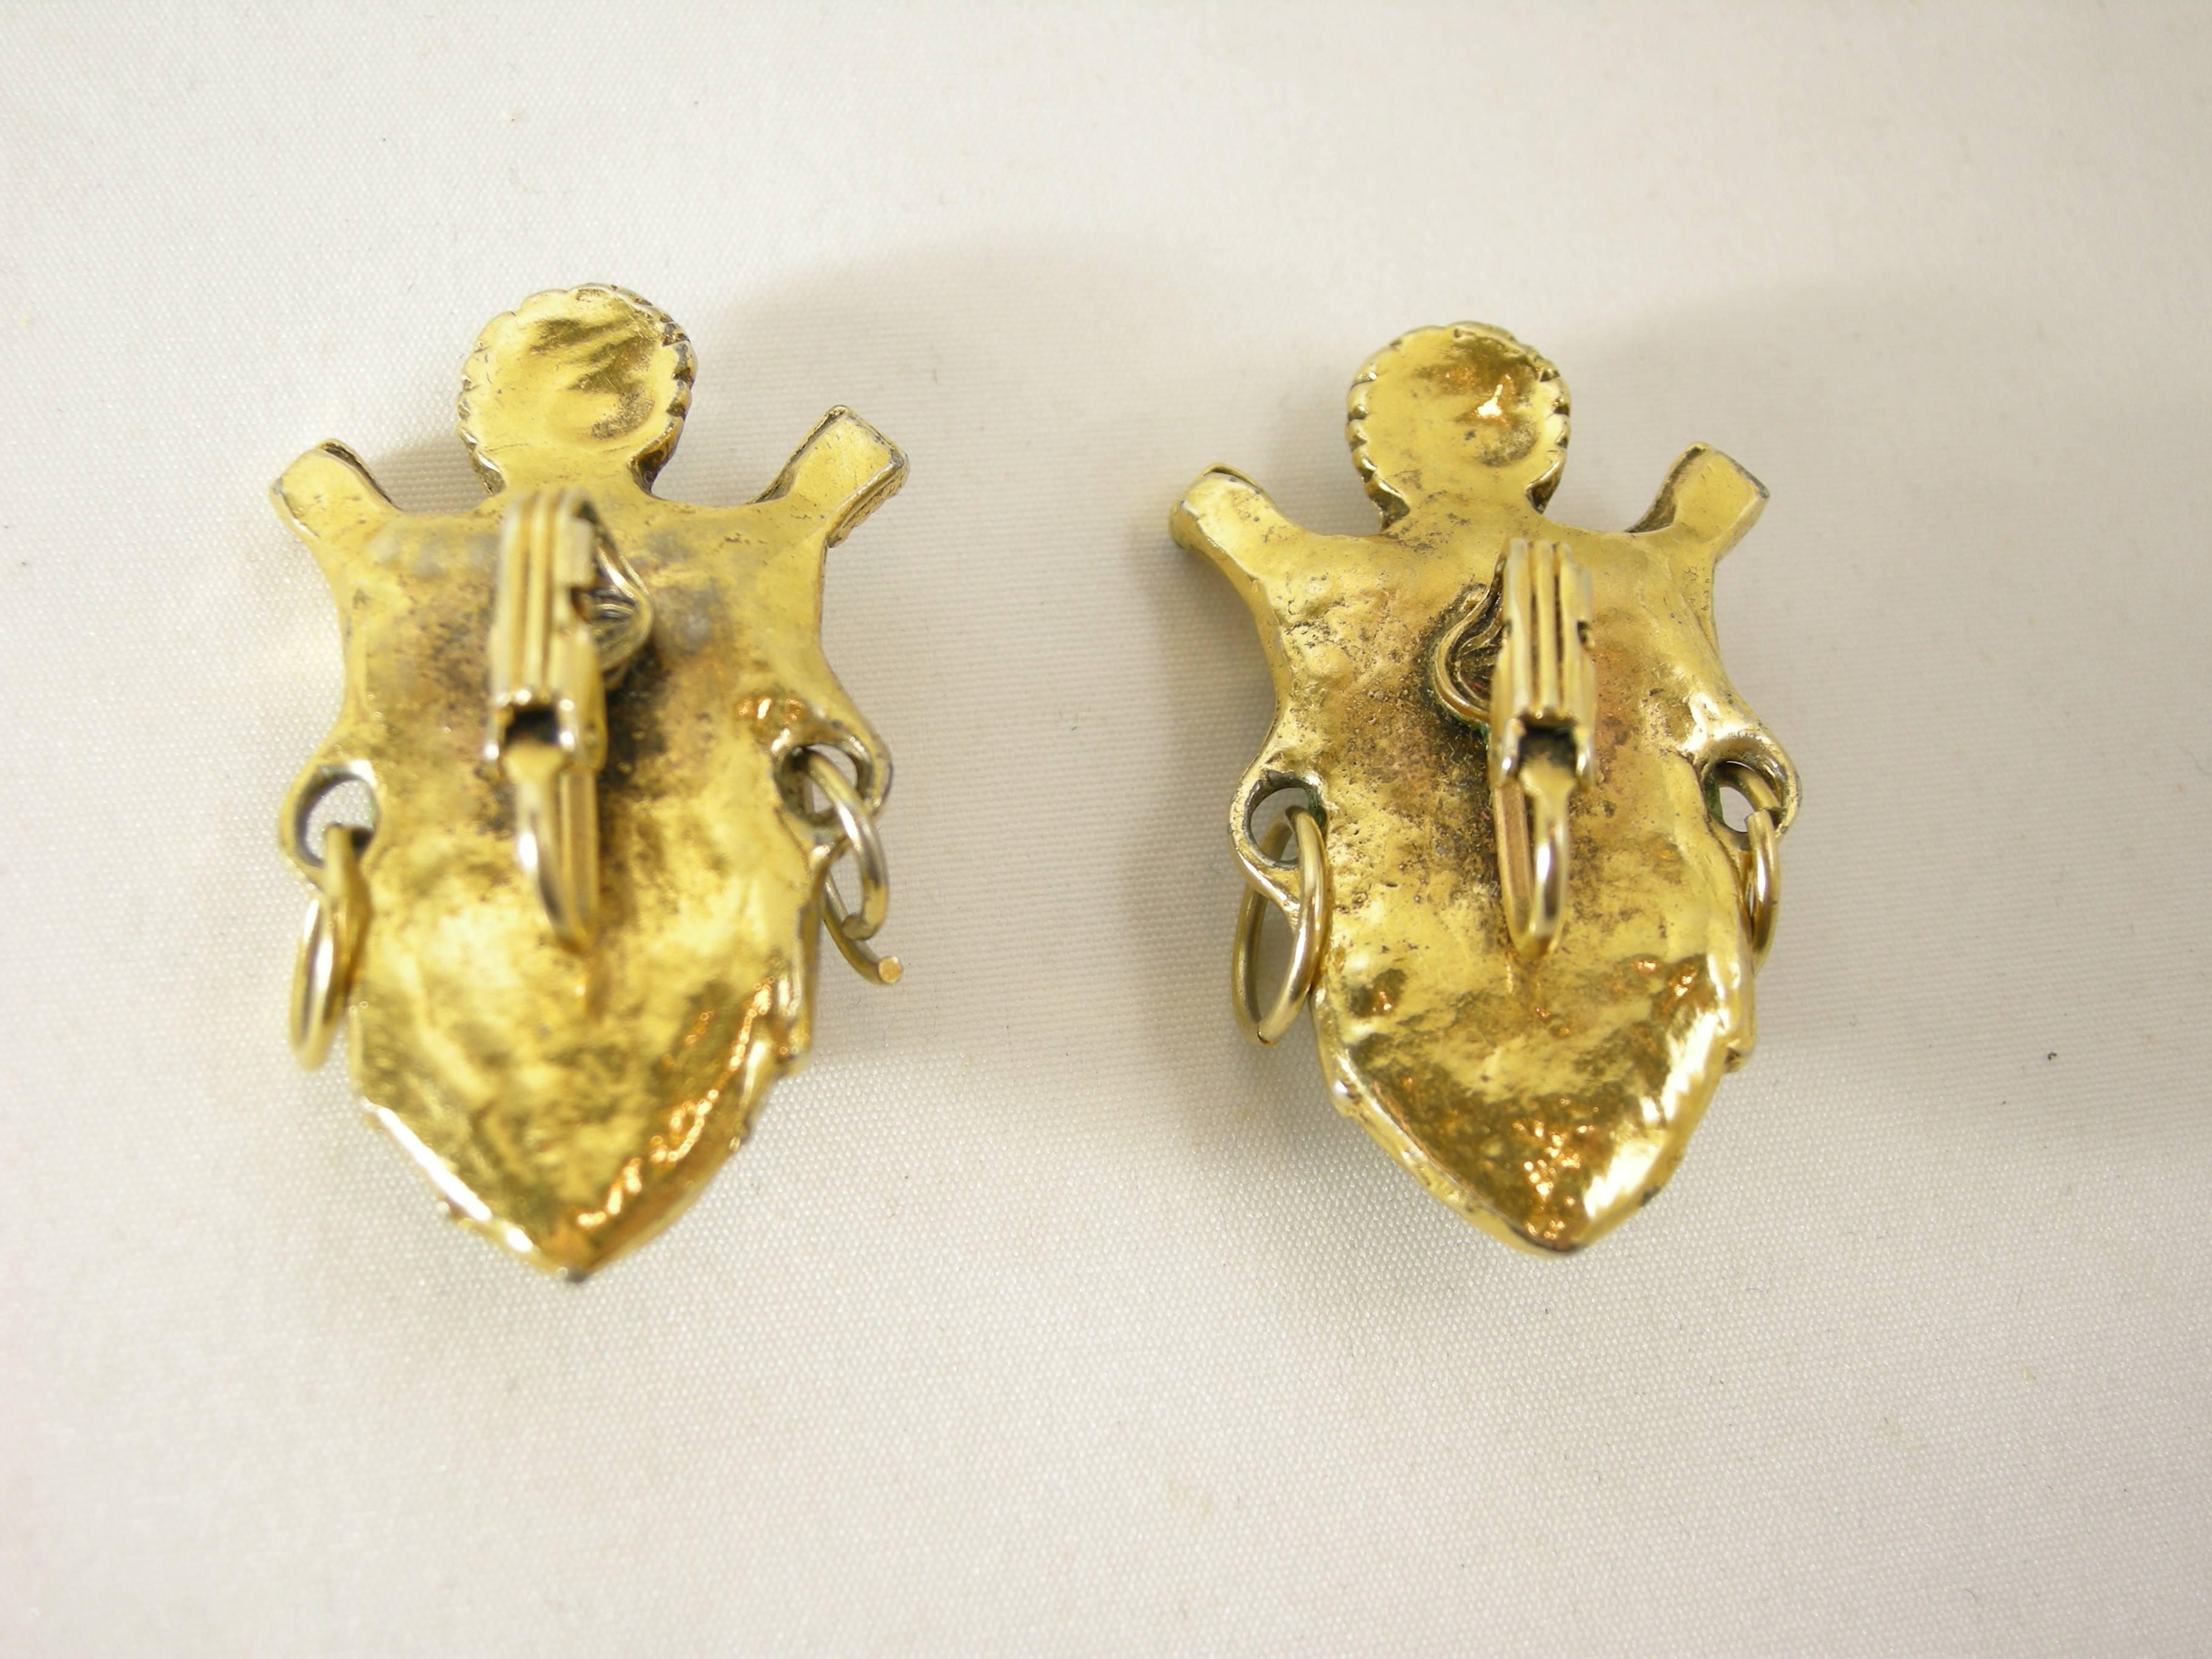 These are a pair of vintage Artisan vintage Selini Selro Asian princess earrings from the 50’s.  The princess is wearing her headdress over white resin with a gold tone setting.  These earrings measure 1-3/4” x 1”. They are unsigned but well-known